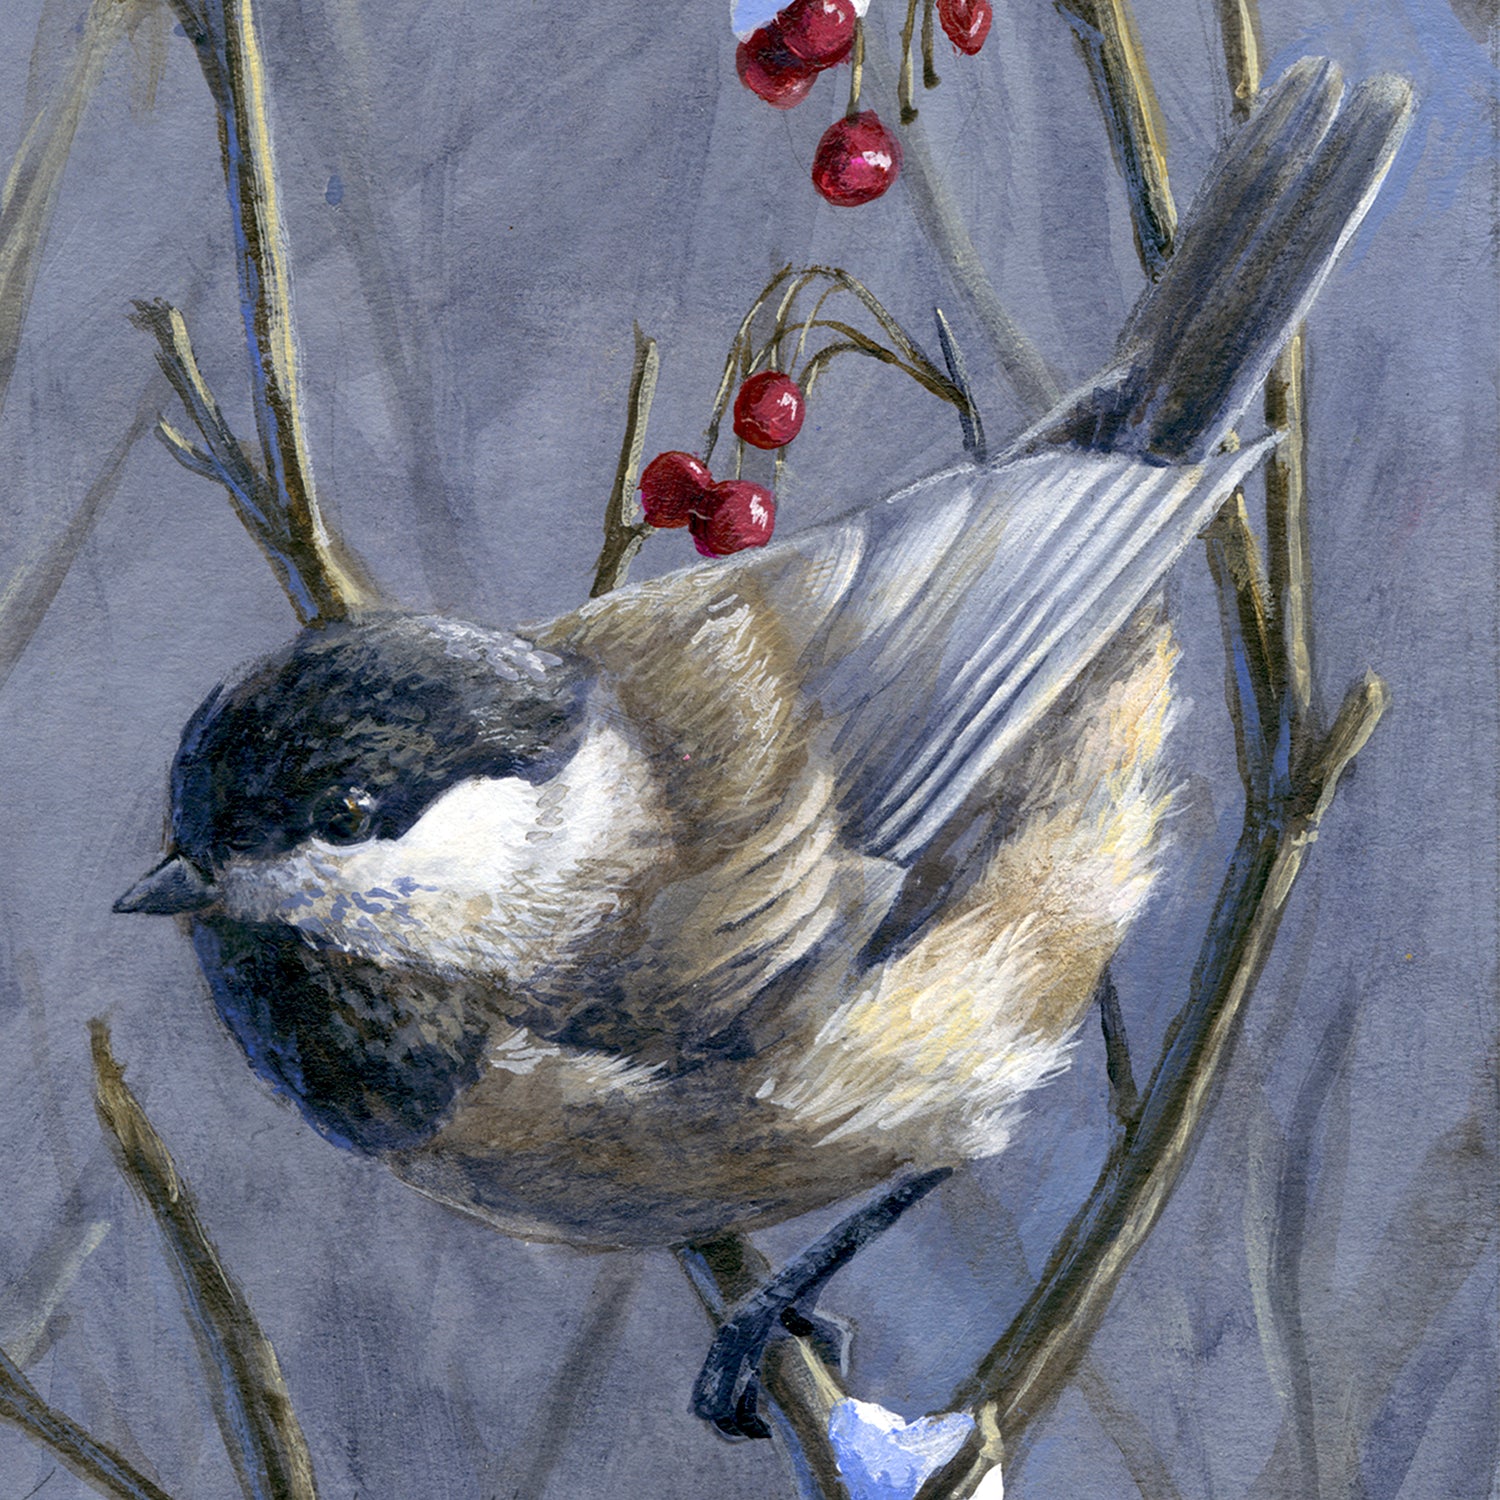 Chickadee bird wall art of snowy branches, berries, and winter wildlife painting by Karen Whitworth.